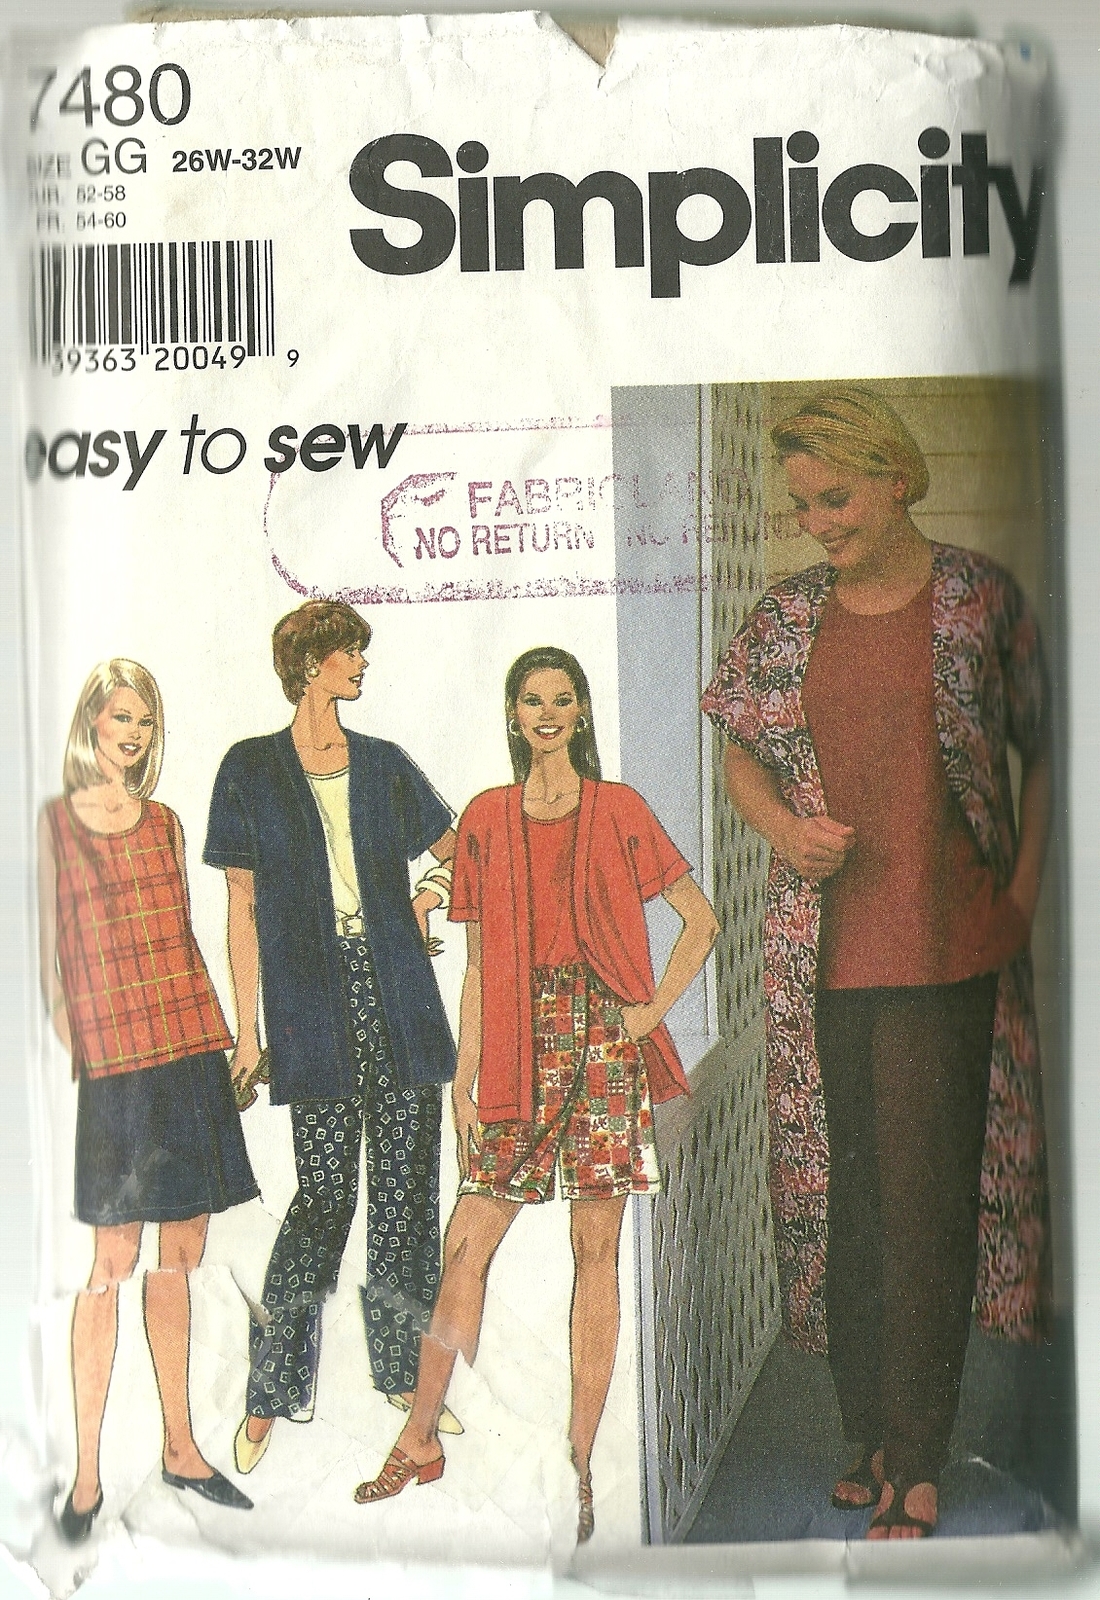 Primary image for Simplicity Sewing Pattern 7480 Misses Womens Jacket Top Shorts Pants 26W - 32W